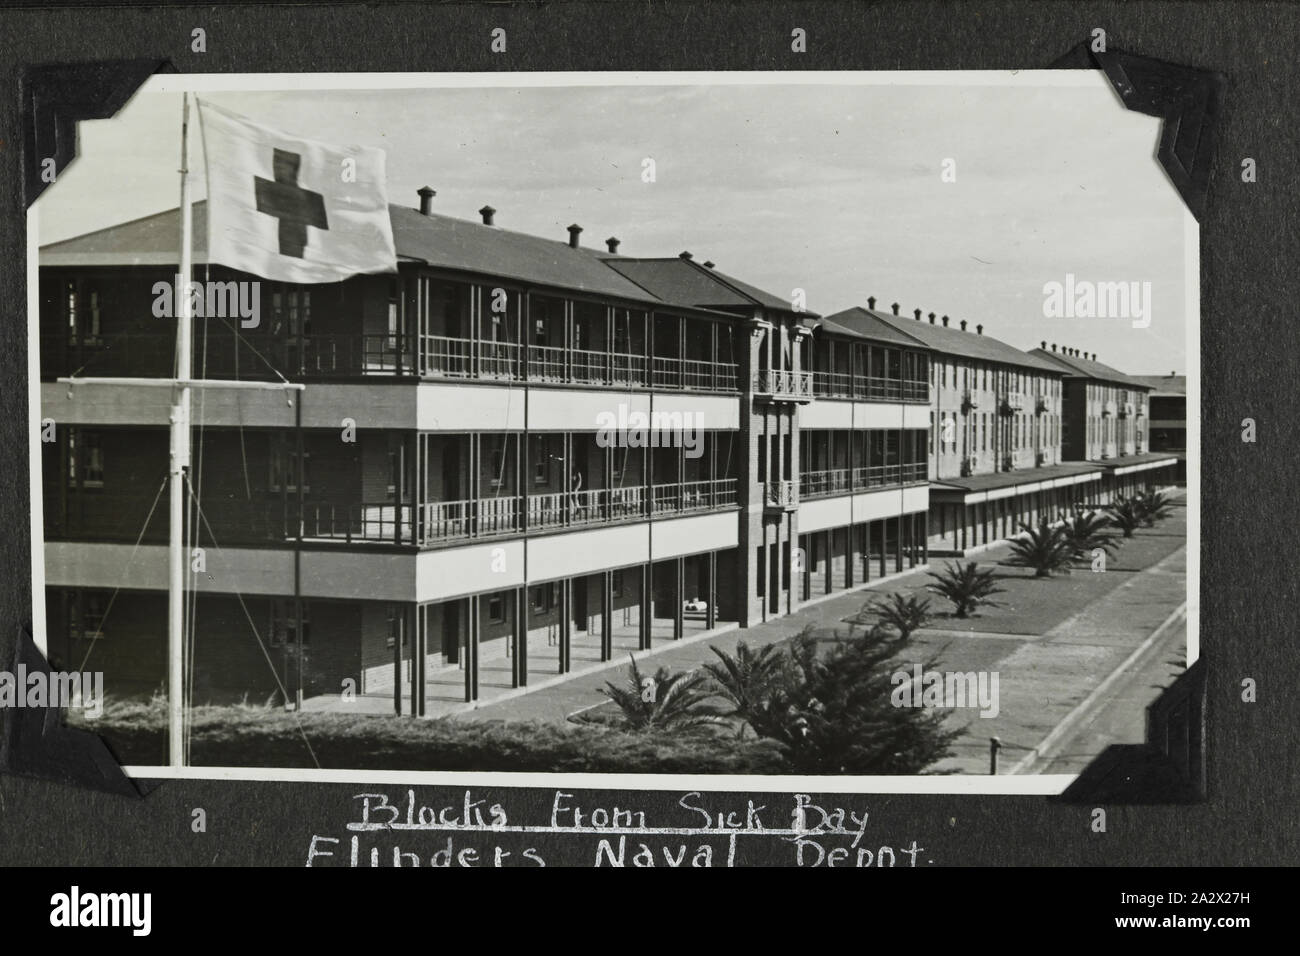 Photograph - 'Blocks from Sick Bay', Flinders Naval Depot, Victoria, 1937-1939, Black and white photograph of the Blocks from the Sick Bay at H.M.A.S Cerberus (Flinders Naval Depot). One of 48 photographs in a photographic album. Taken by D.R.Goodwin, Royal Australian Navy (R.A.N.) 1937-1939. The images are of H.M.A.S Cerberus and other naval ships, naval training and field gun crews Stock Photo